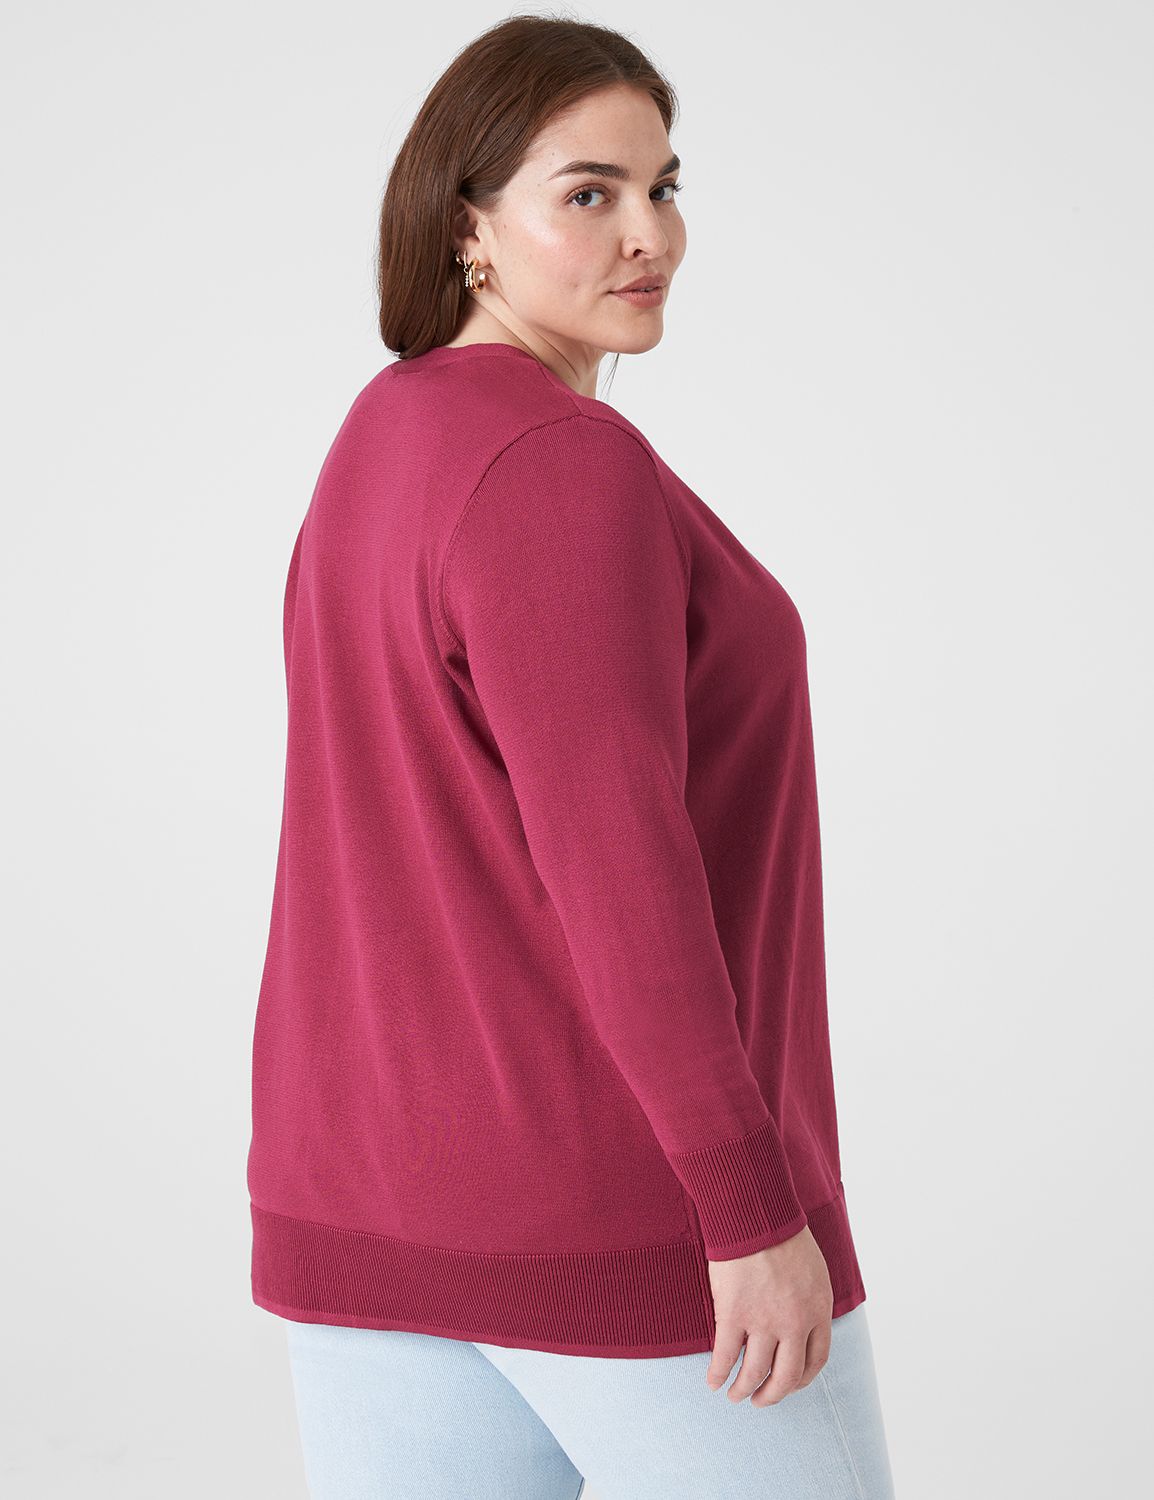 Classic Long Sleeve Open Front Mode | LaneBryant